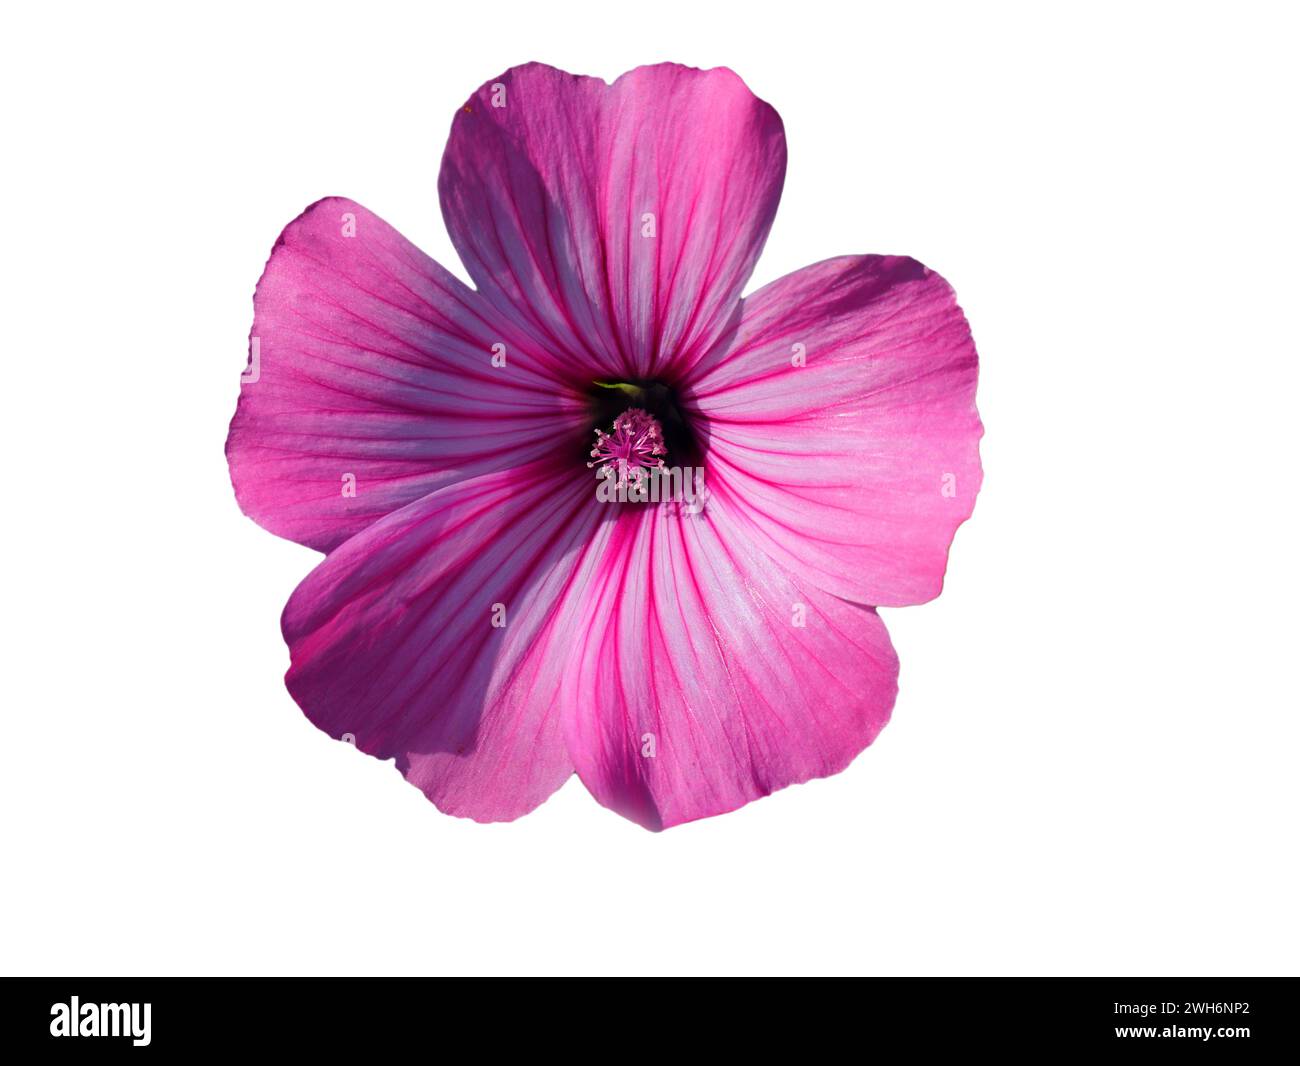 Spring, Portugal. Annual Mallow also known as Rose Mallow or Royal Mallow. Lavatera rosa in full bloom isolated on a white background Malvaceae Family Stock Photo